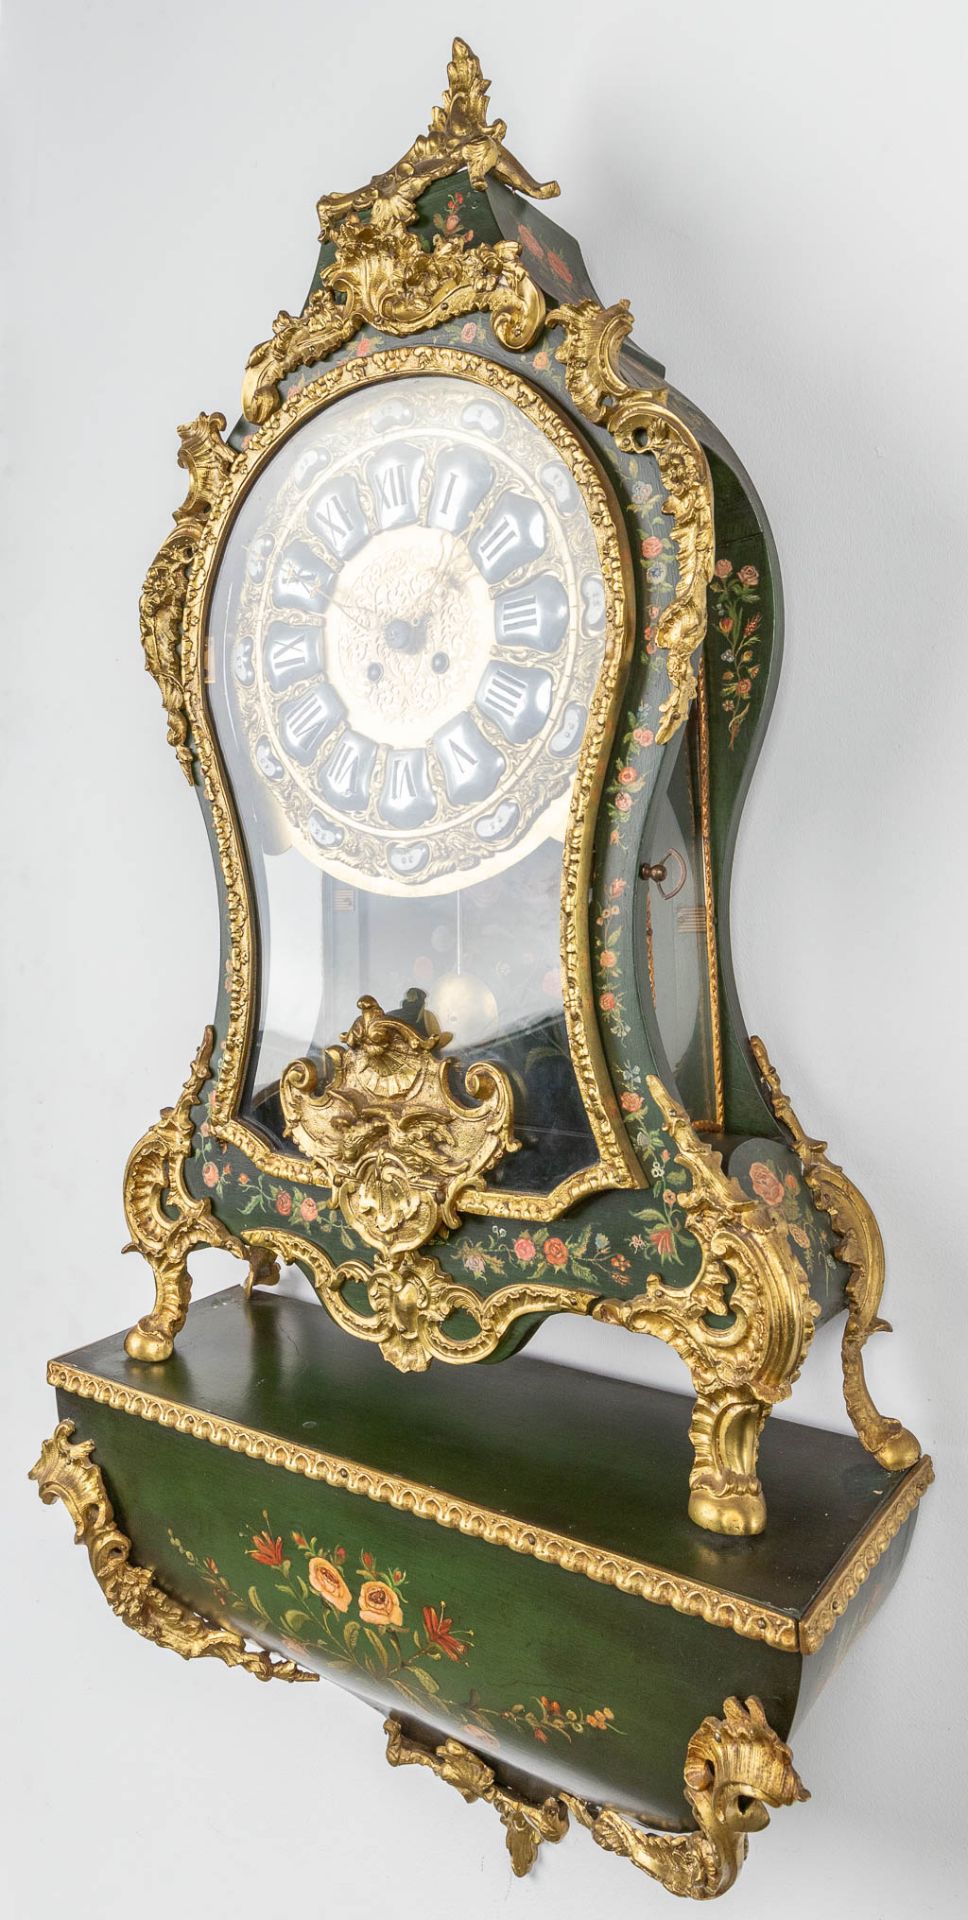 A Cartel clock with console with hand-painted flower decor. (52 x 115cm) - Image 14 of 16